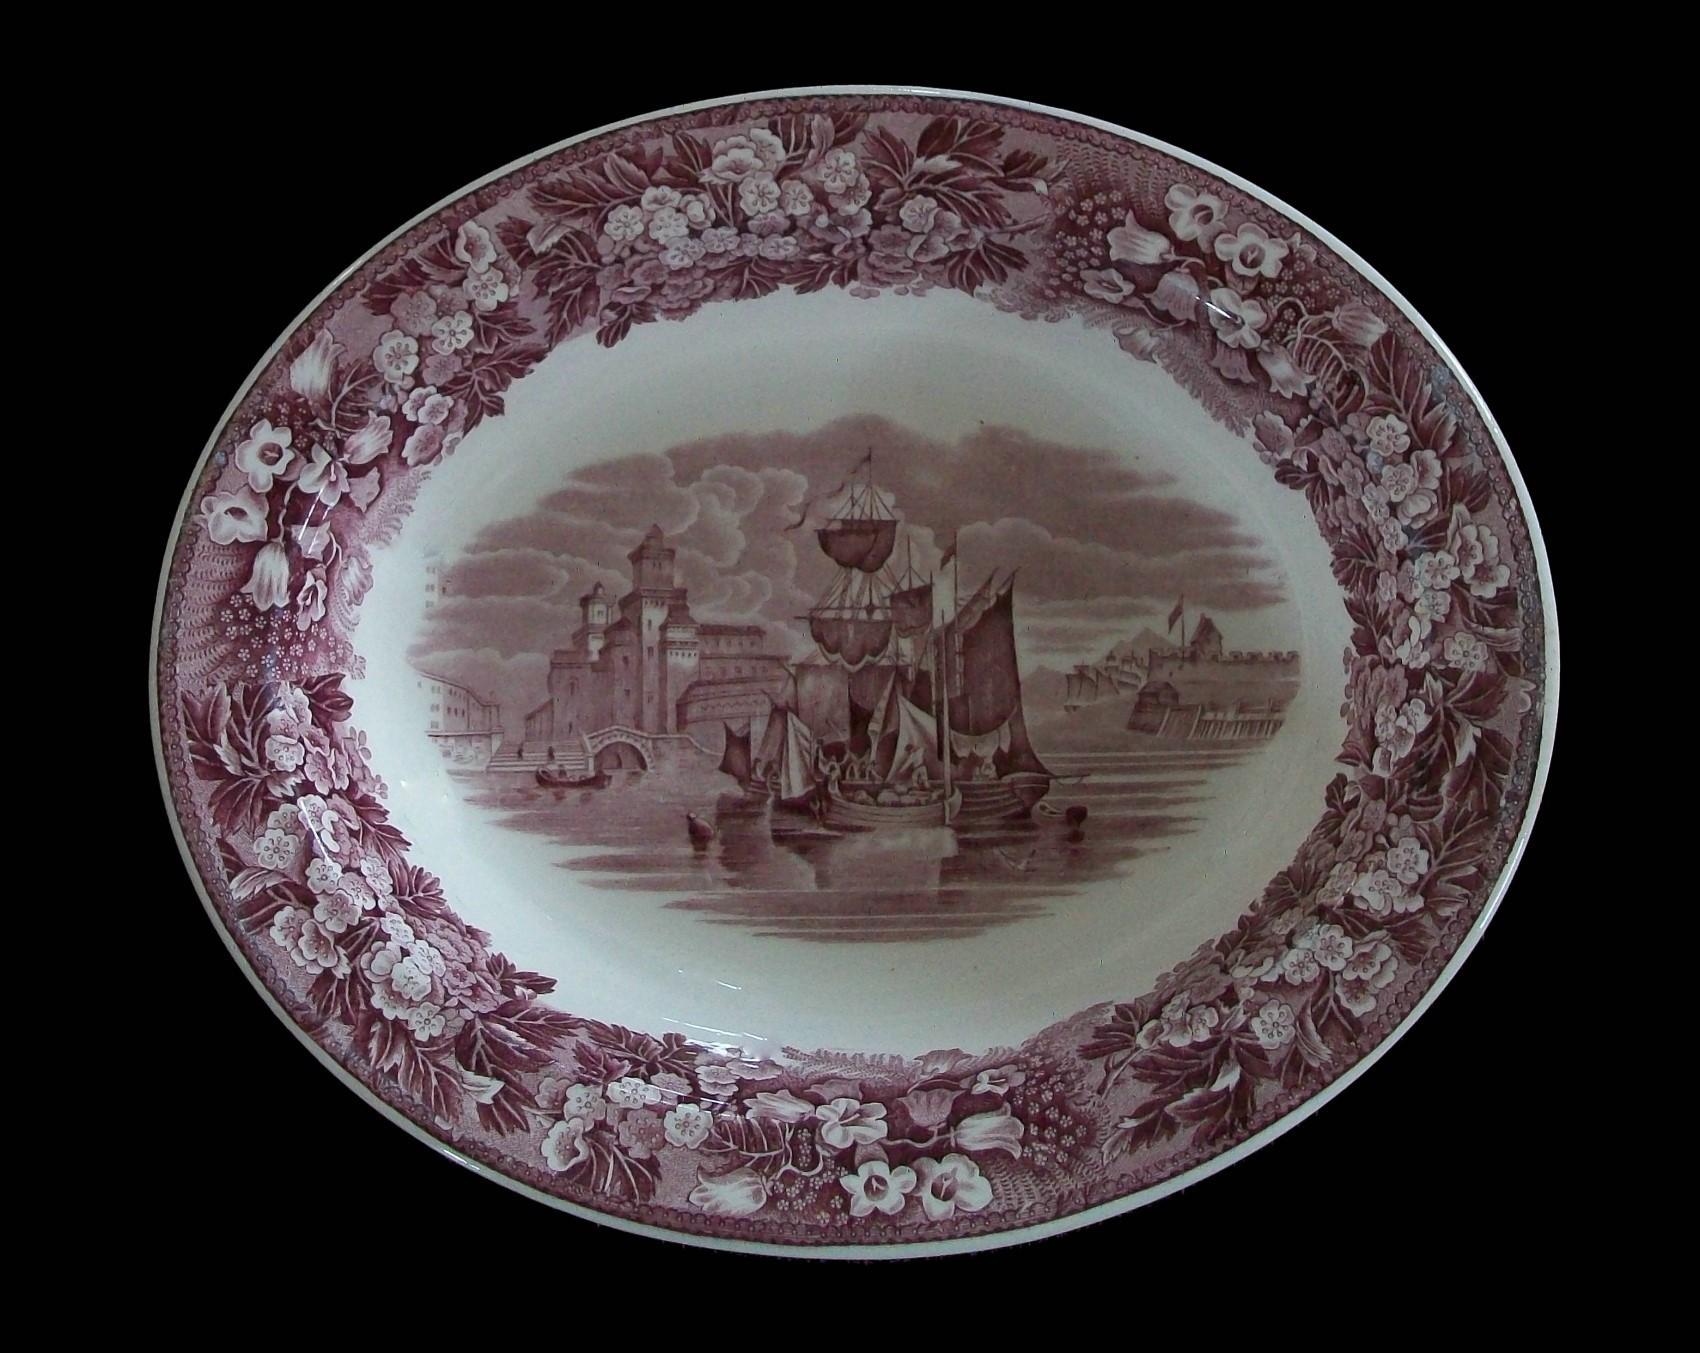 WEDGWOOD - 'Ferrara' - Antique ceramic serving bowl - transfer decorated in red (Mulberry) on a cream ground - elaborate decoration featuring a central panel with a ship and castle within a landscape - floral border - floral band to the outside wall